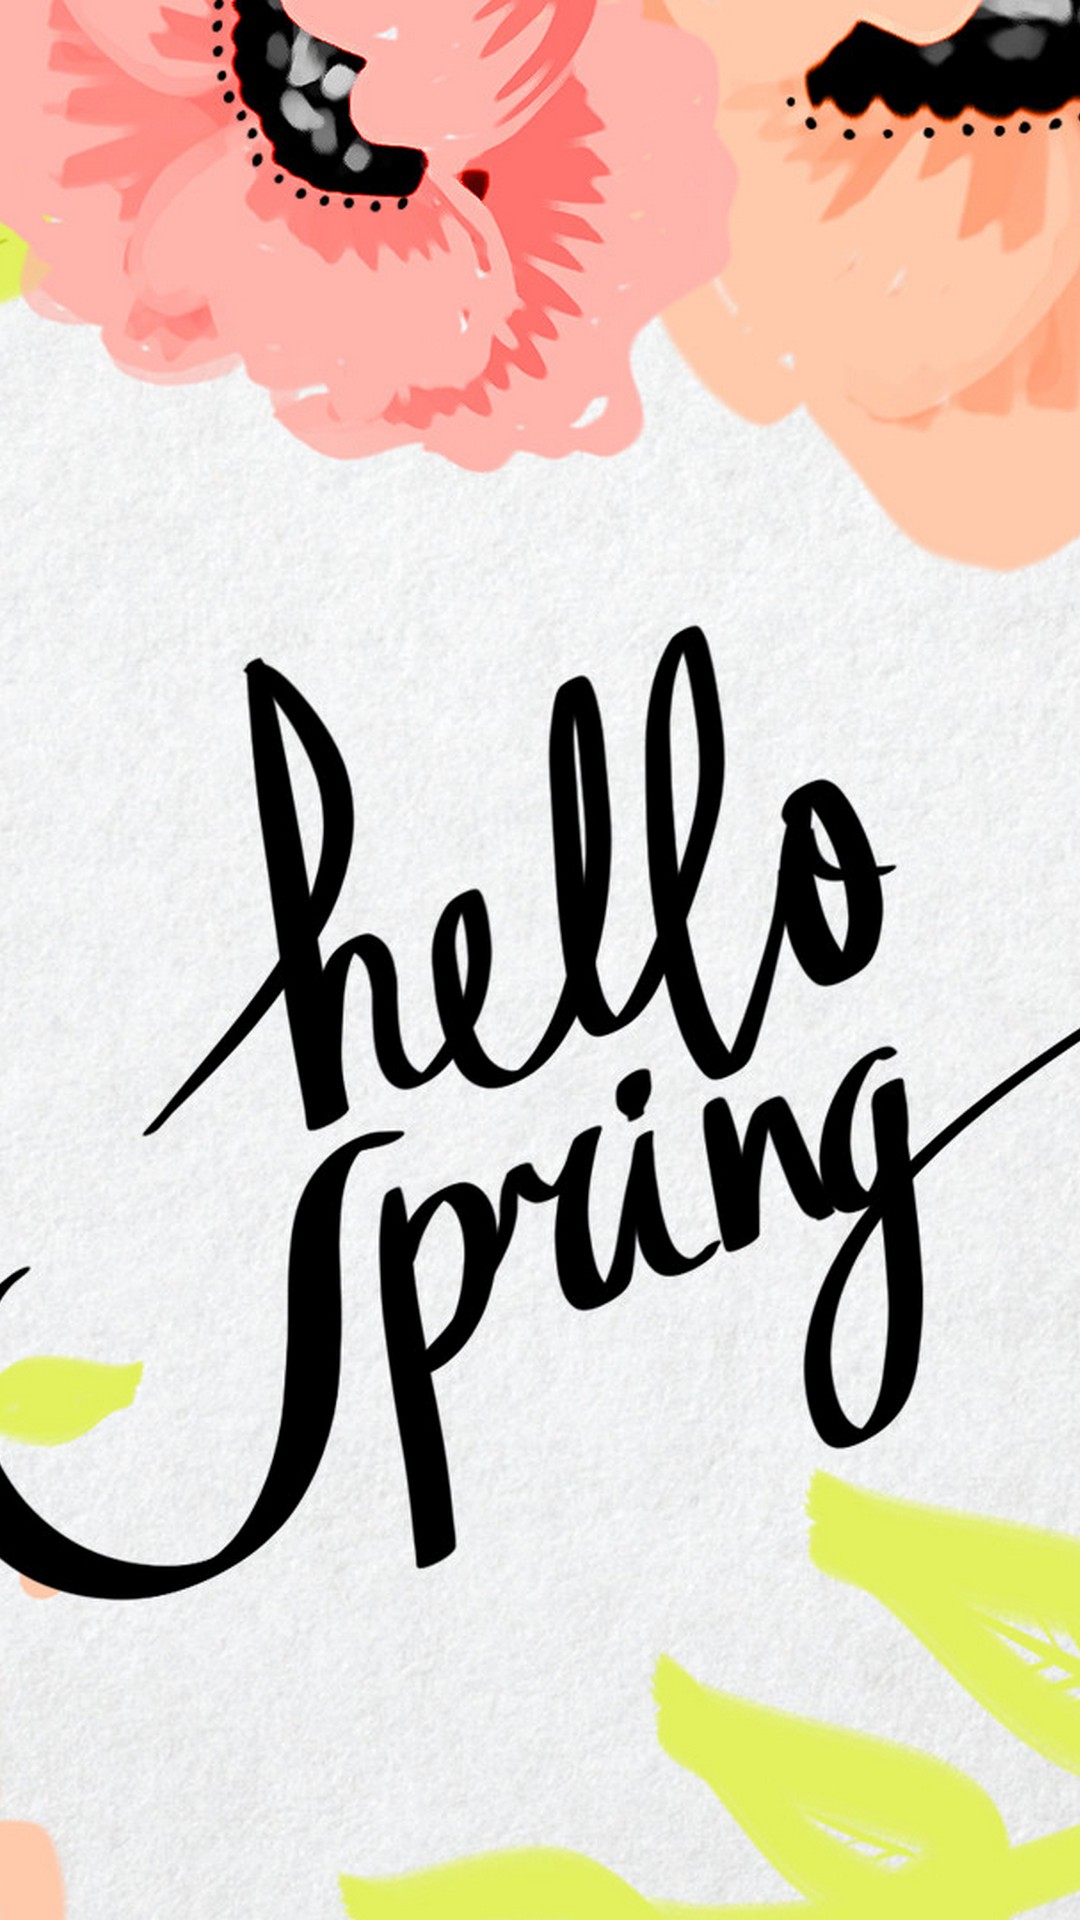 Hello Spring Backgrounds For Android with HD resolution 1080x1920